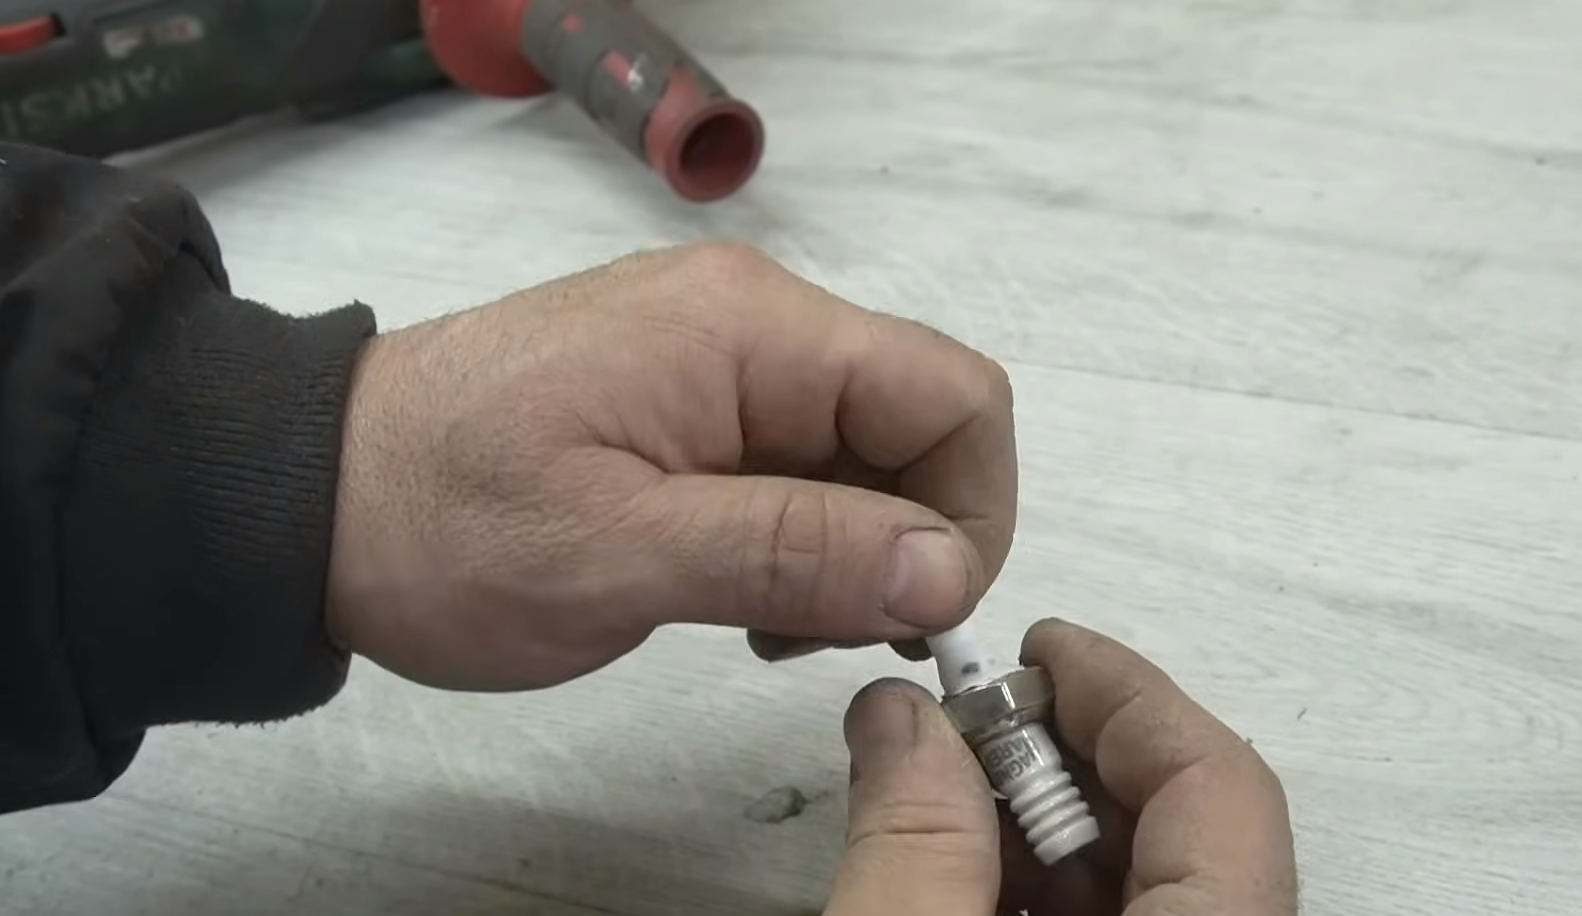 What Happens With Old Spark Plugs?